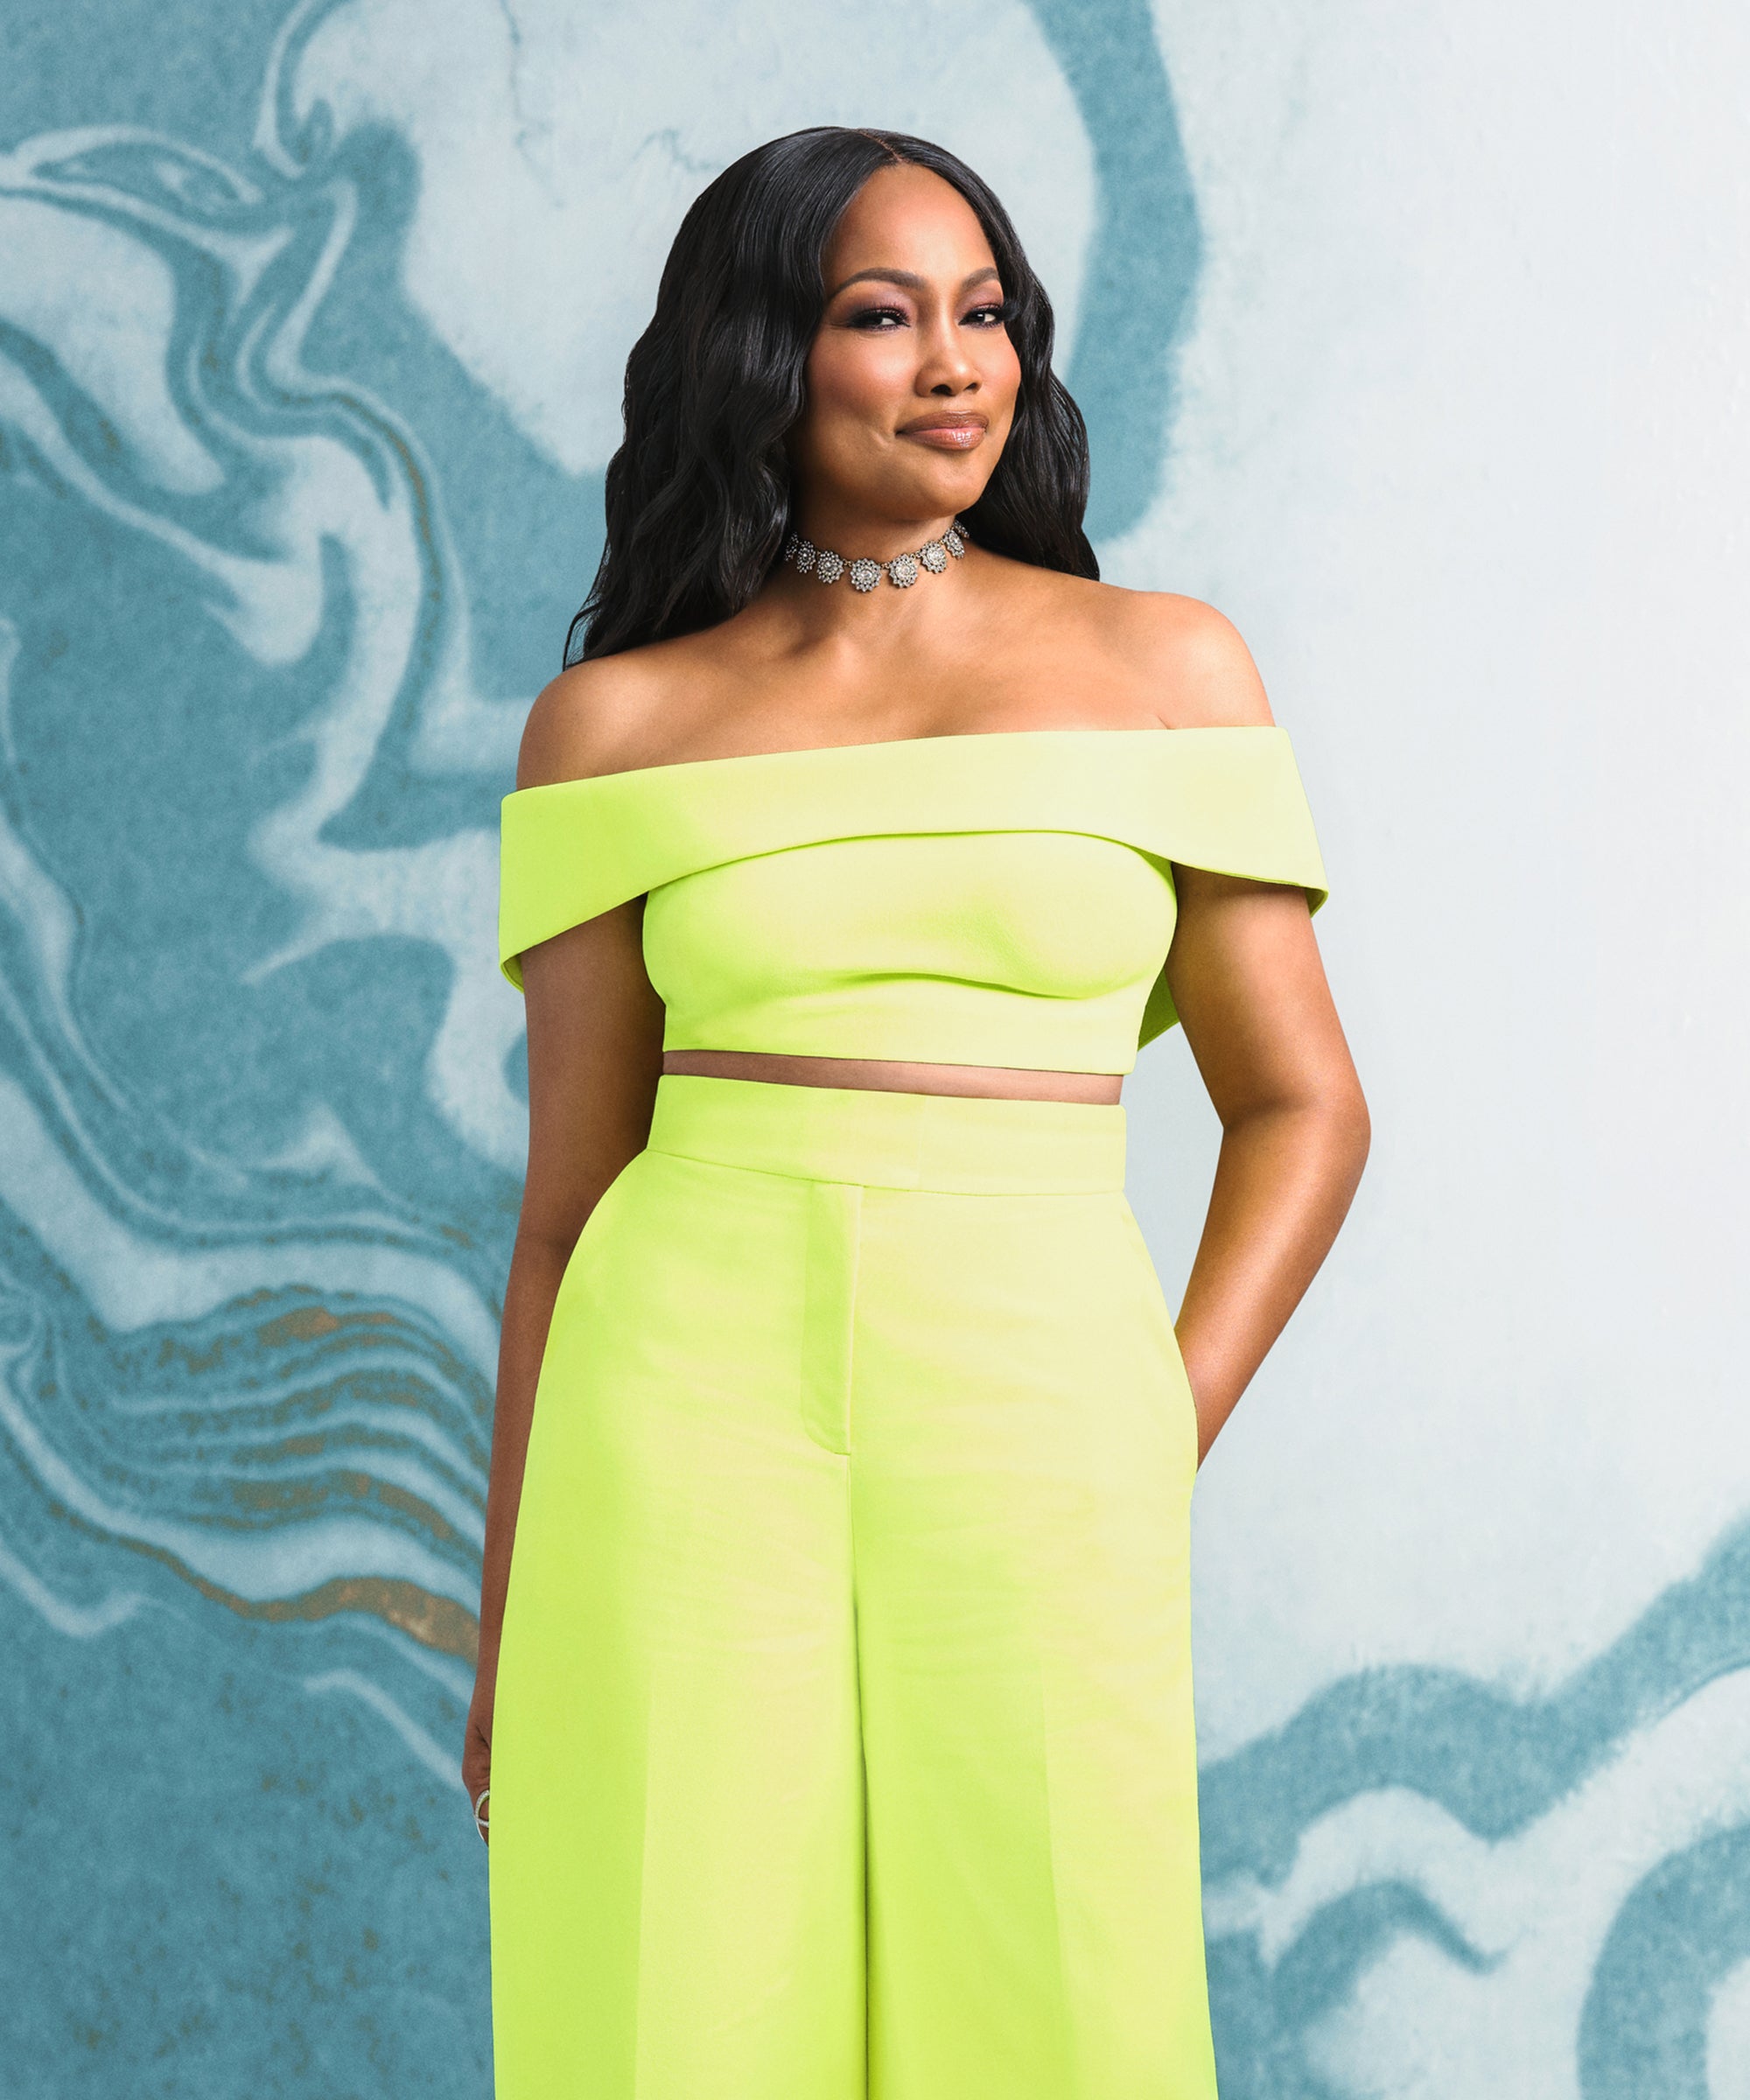 New RHOBH Housewife Garcelle Beauvais Is Making History pic